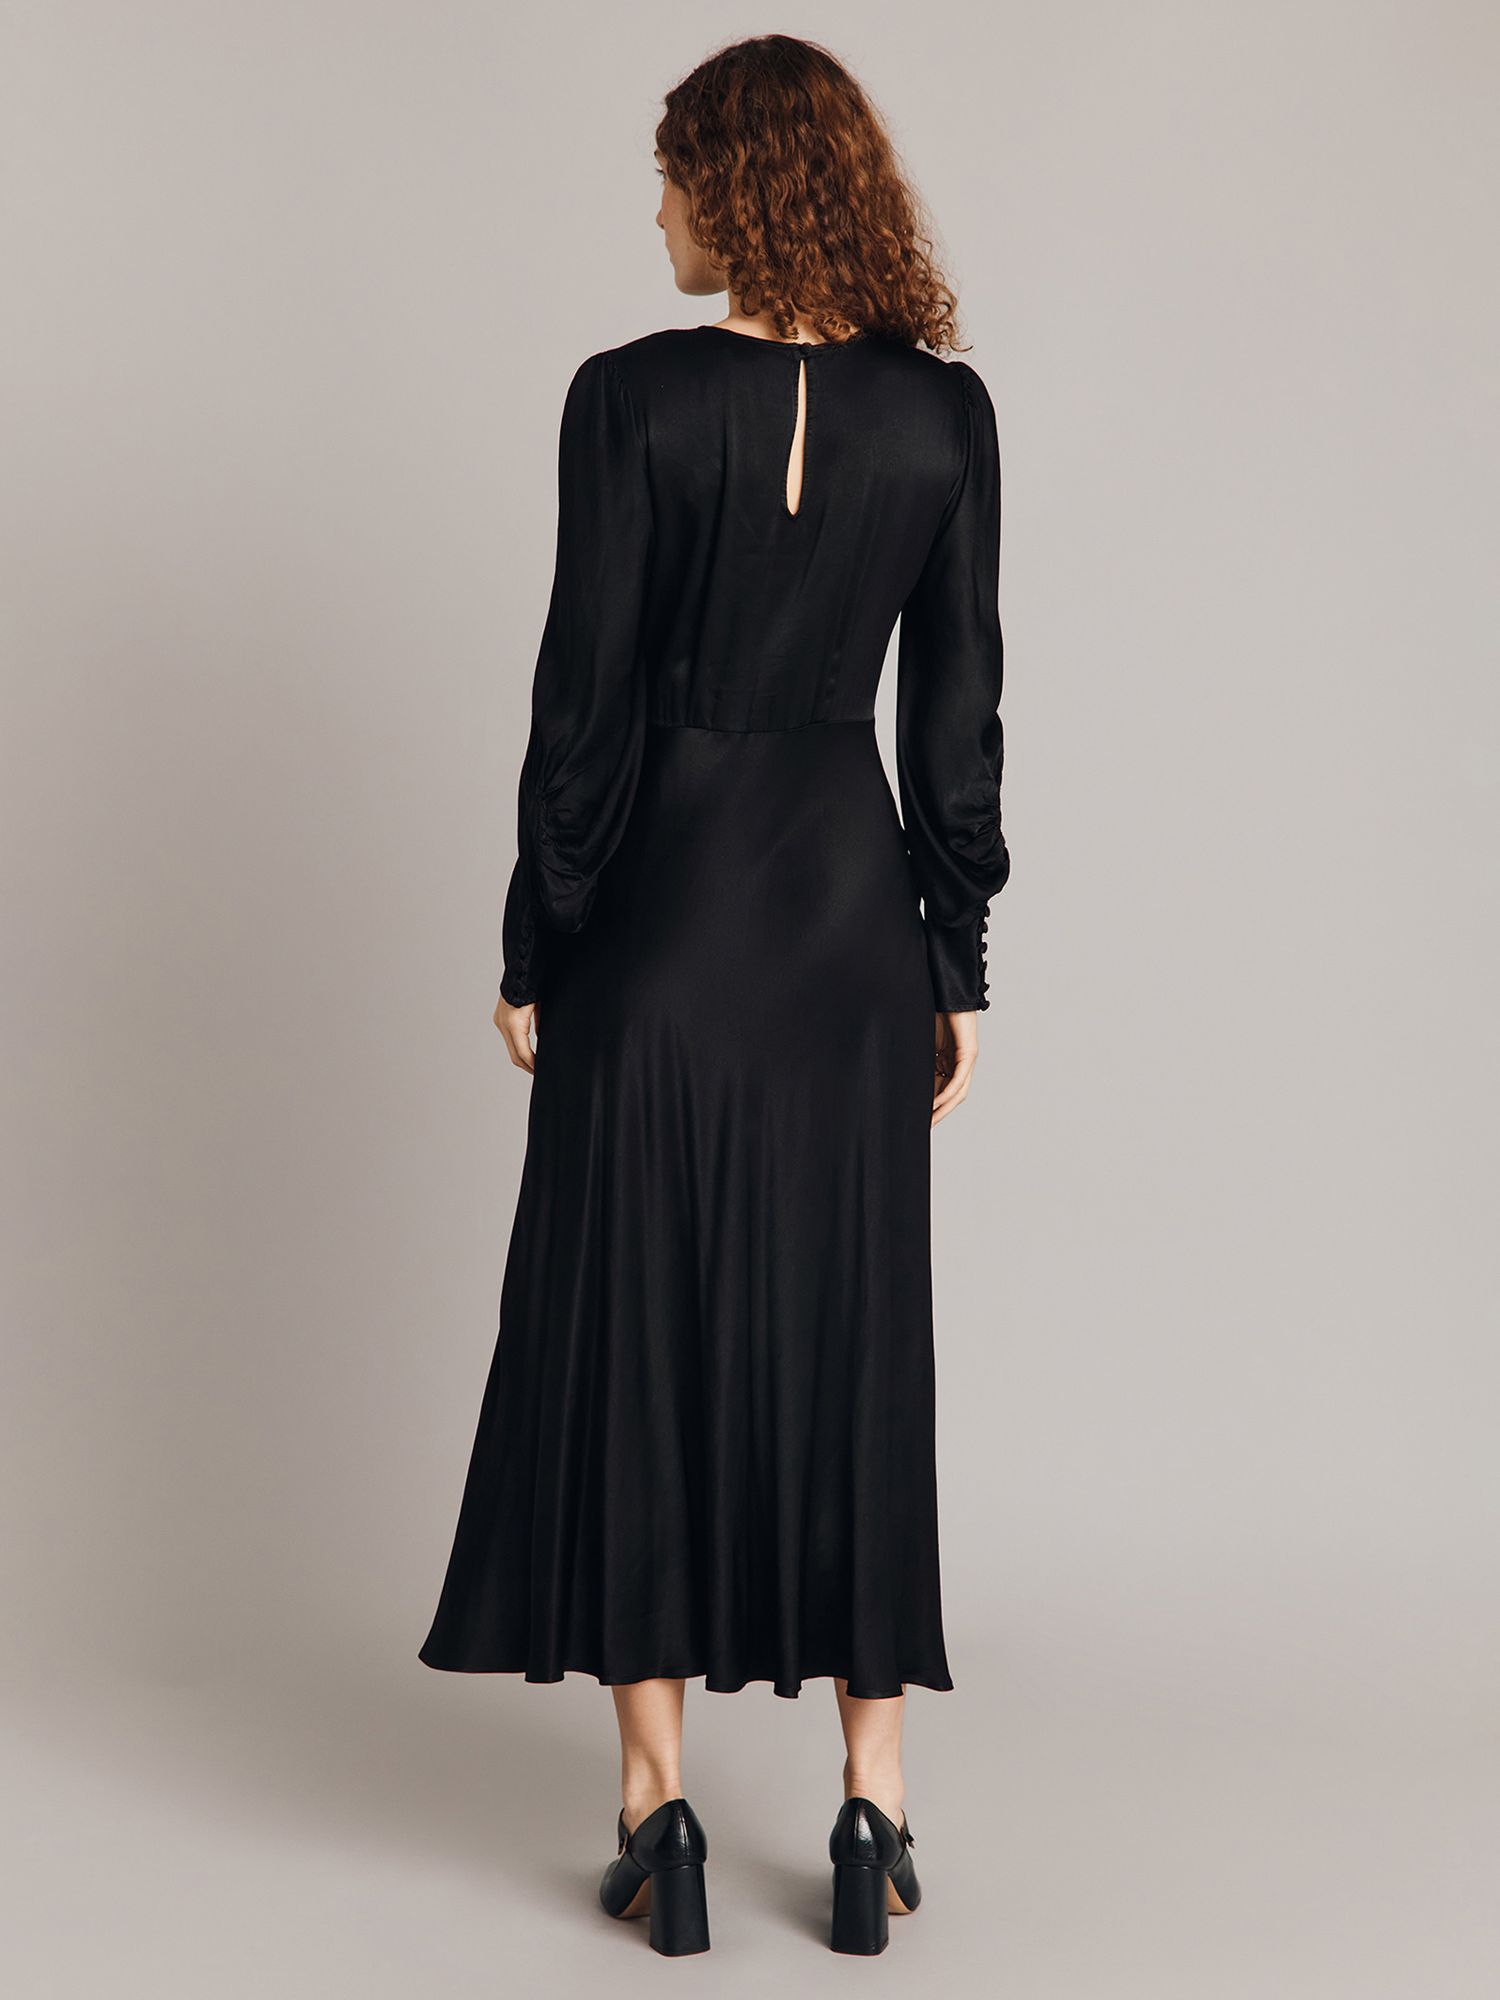 Ghost Fiona Ruched Satin Midi Dress, Black at John Lewis & Partners